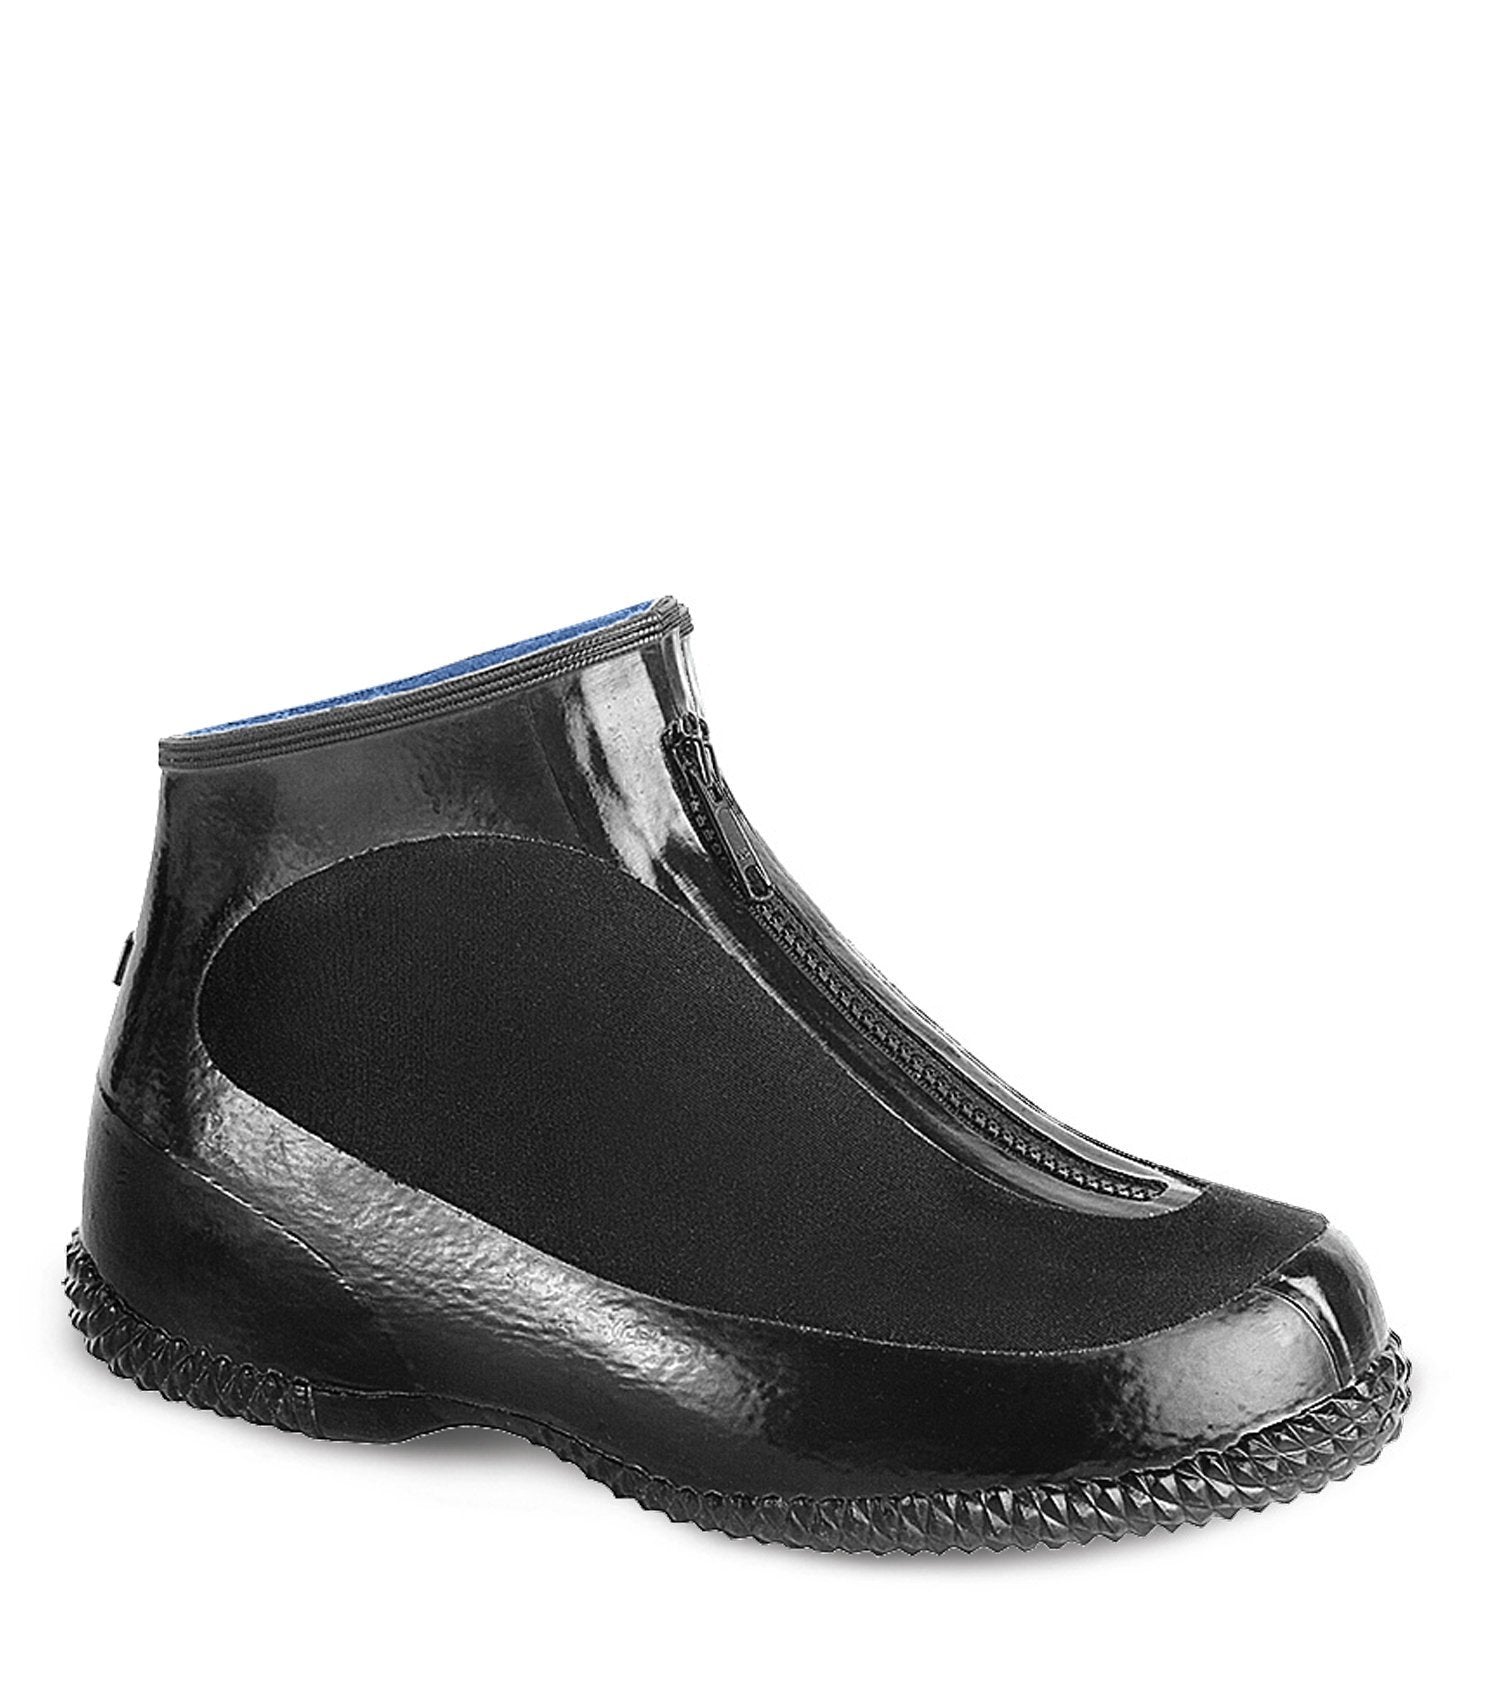 Acton Joule Fleece Lined Natural Rubber Overshoes | Size 6-13 Work Boots - Cleanflow